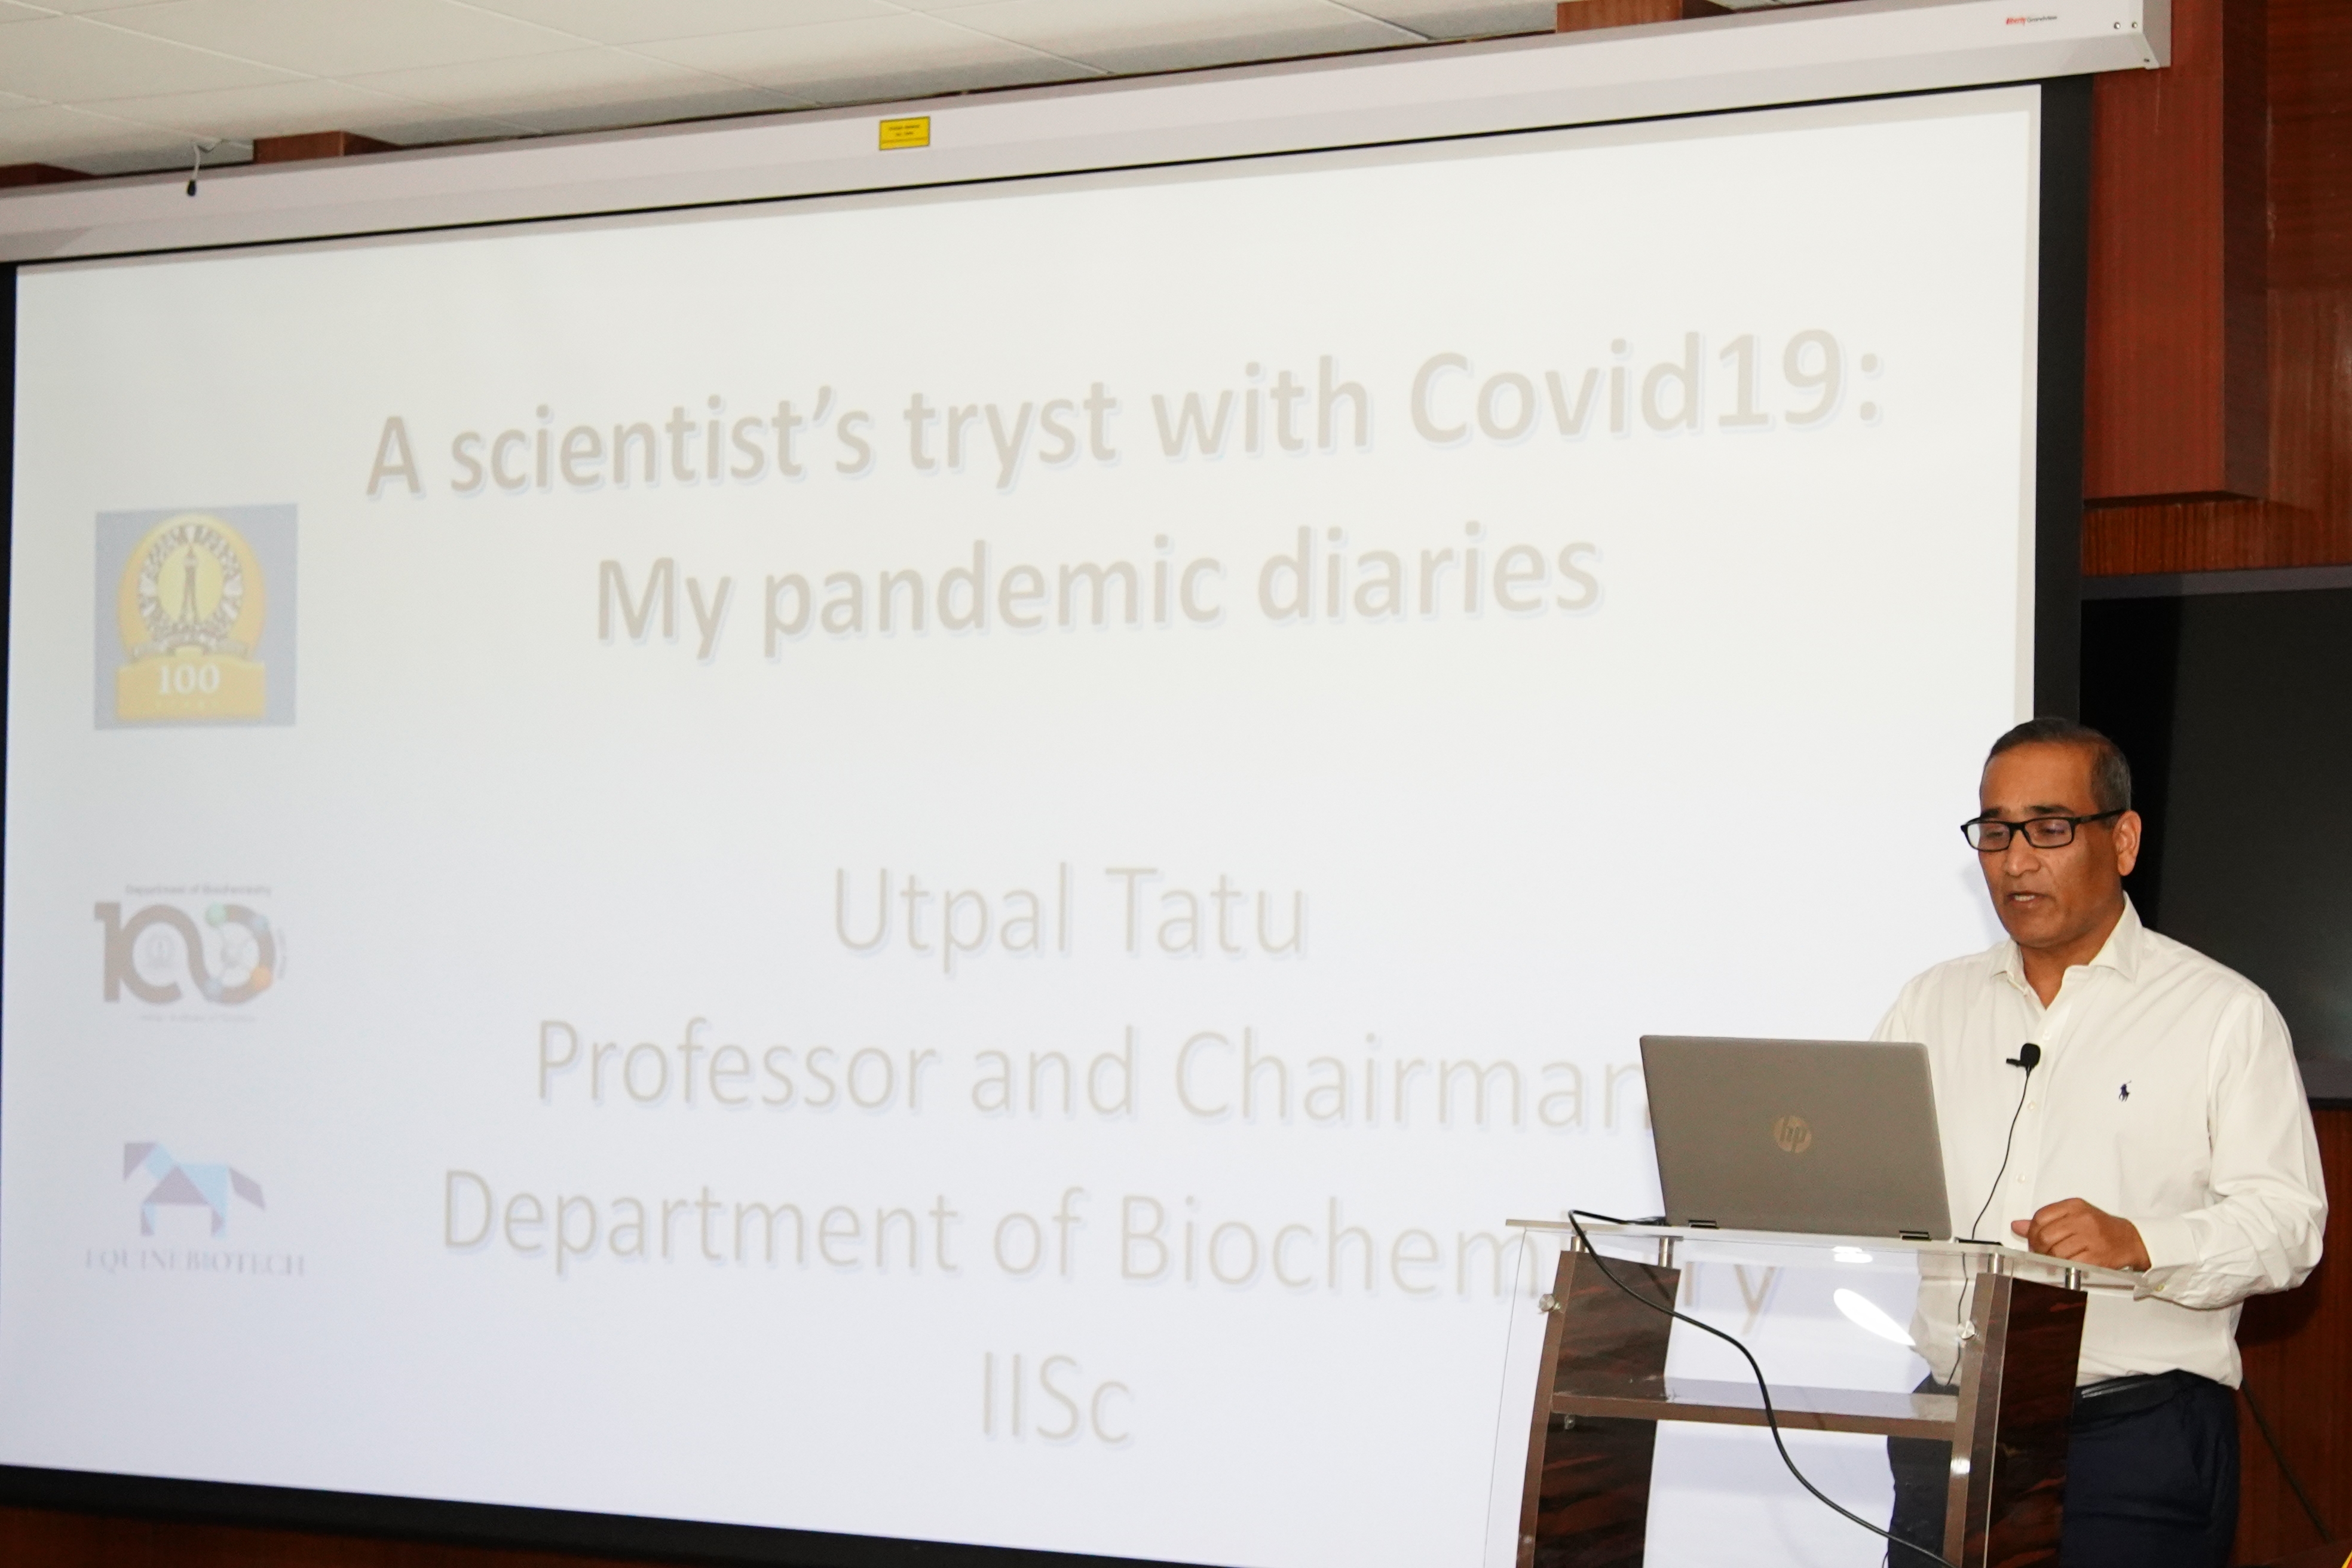 Utpal Tatu reflects on his contributions during COVID-19